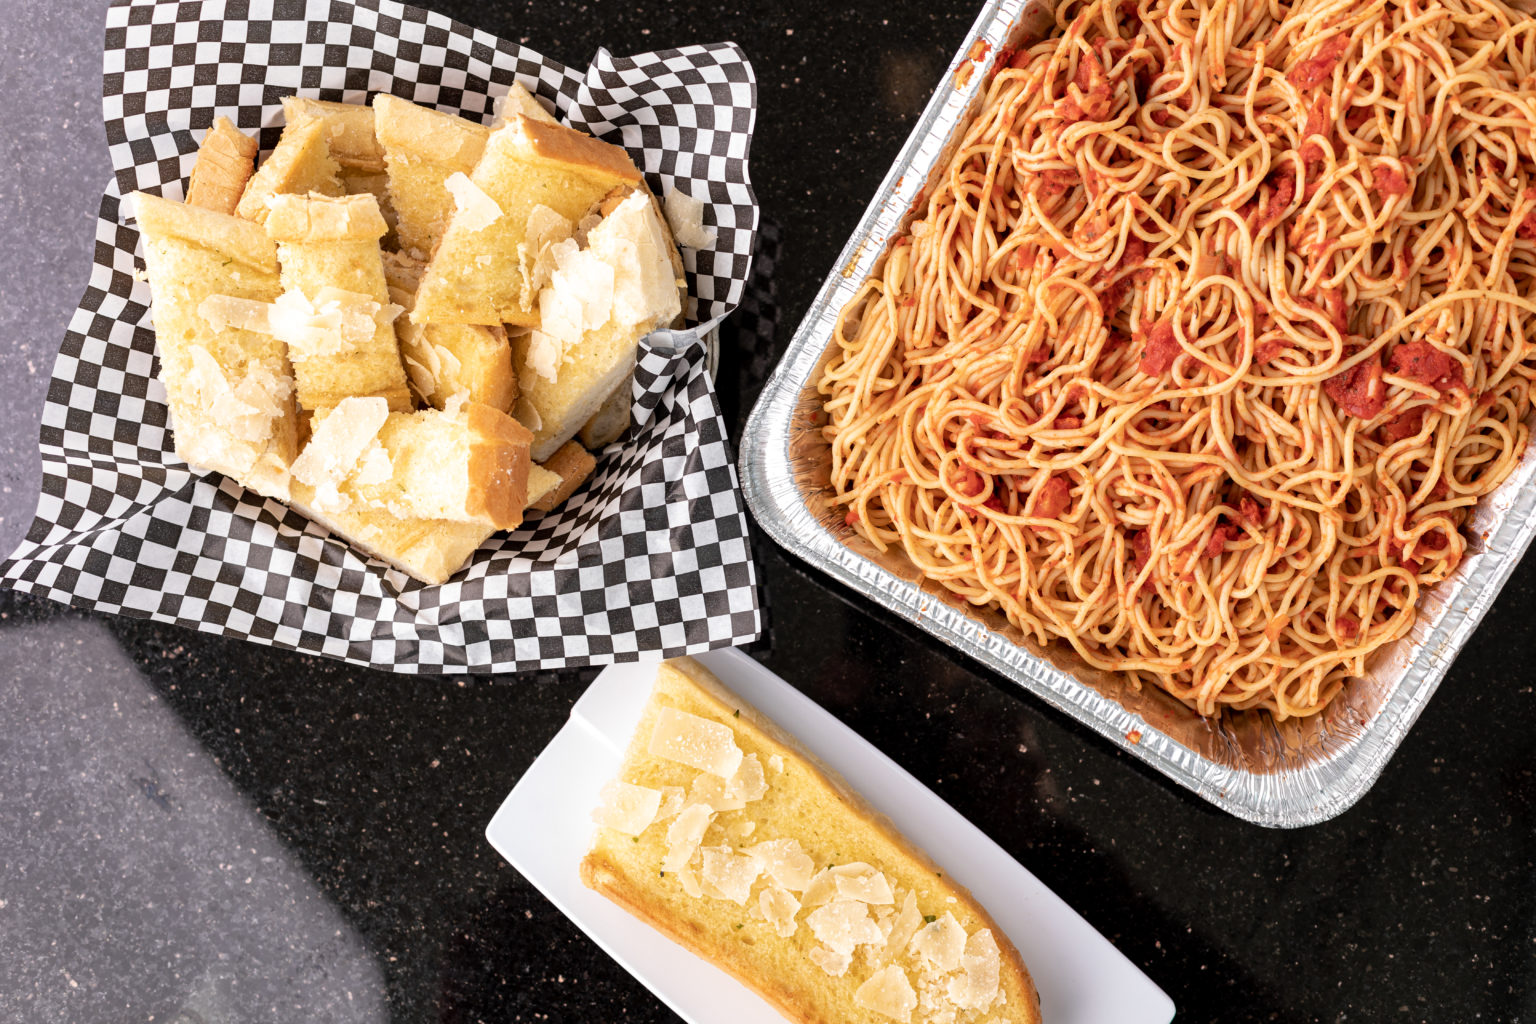 Spaghetti with buttered cheese bread